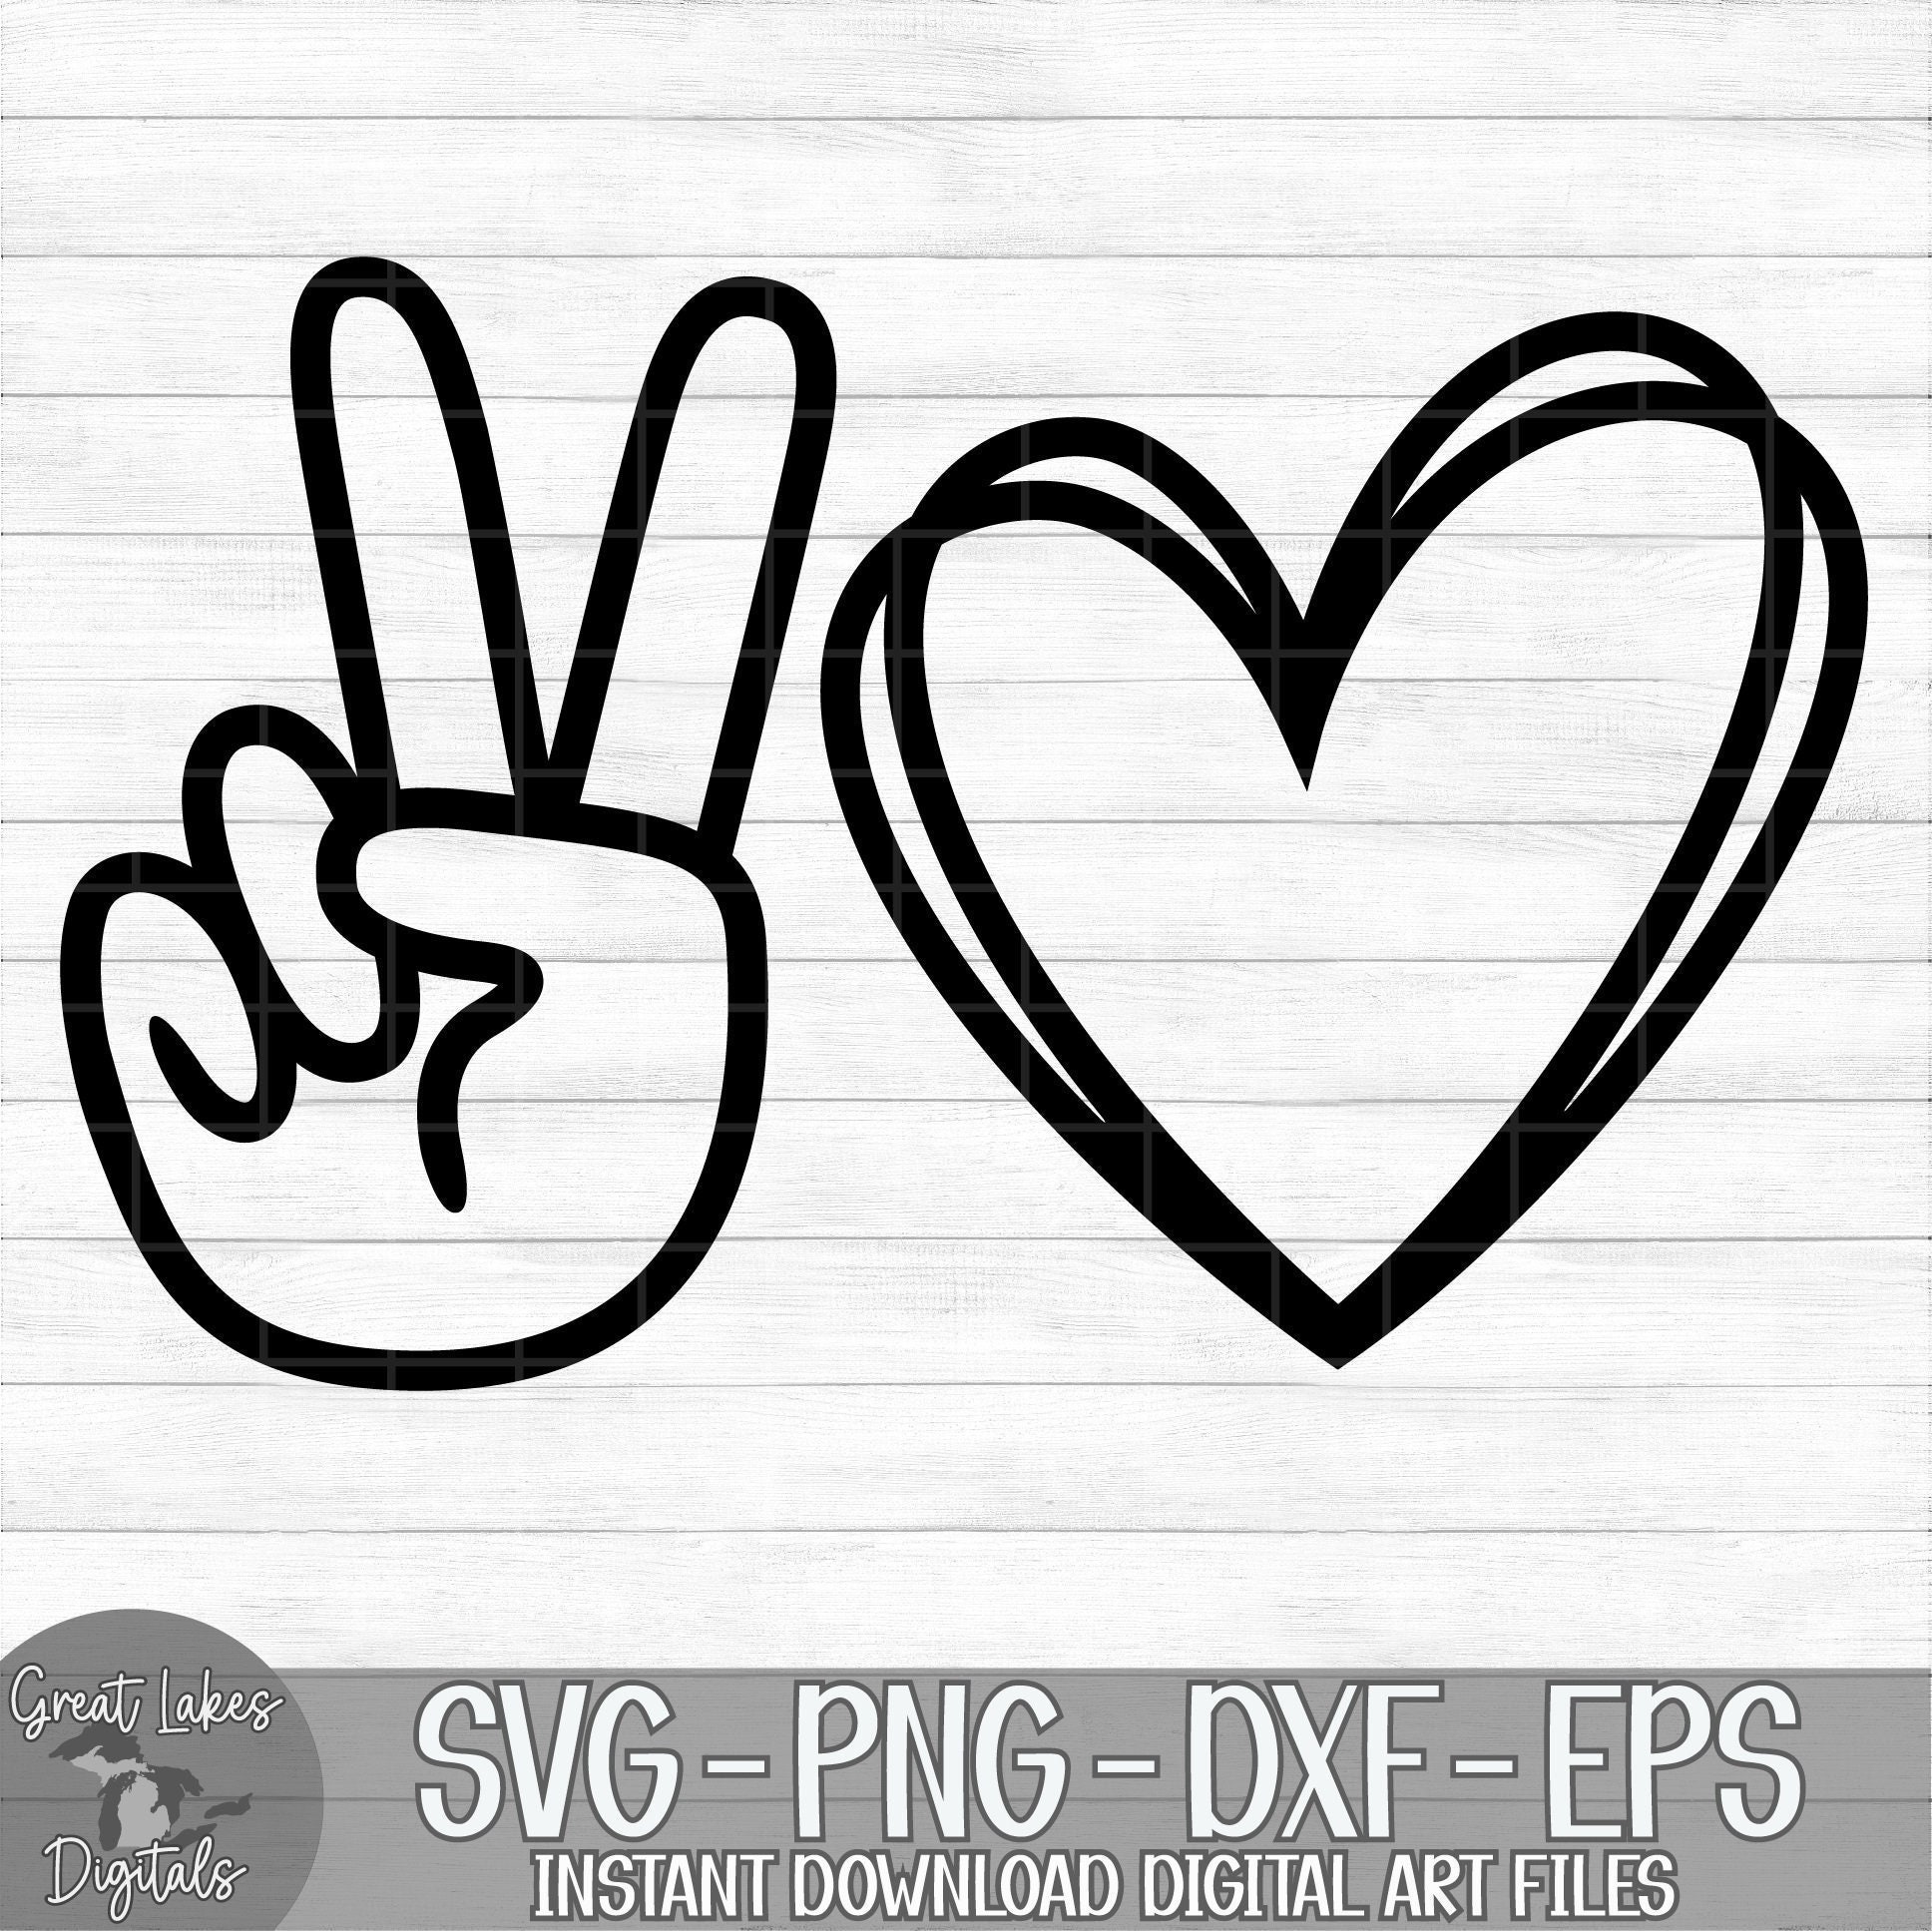 Peace and Love Instant Digital Download Svg, Png, Dxf, and Eps Files  Included Peace Hand, Peace Sign, Signal, Heart -  Norway